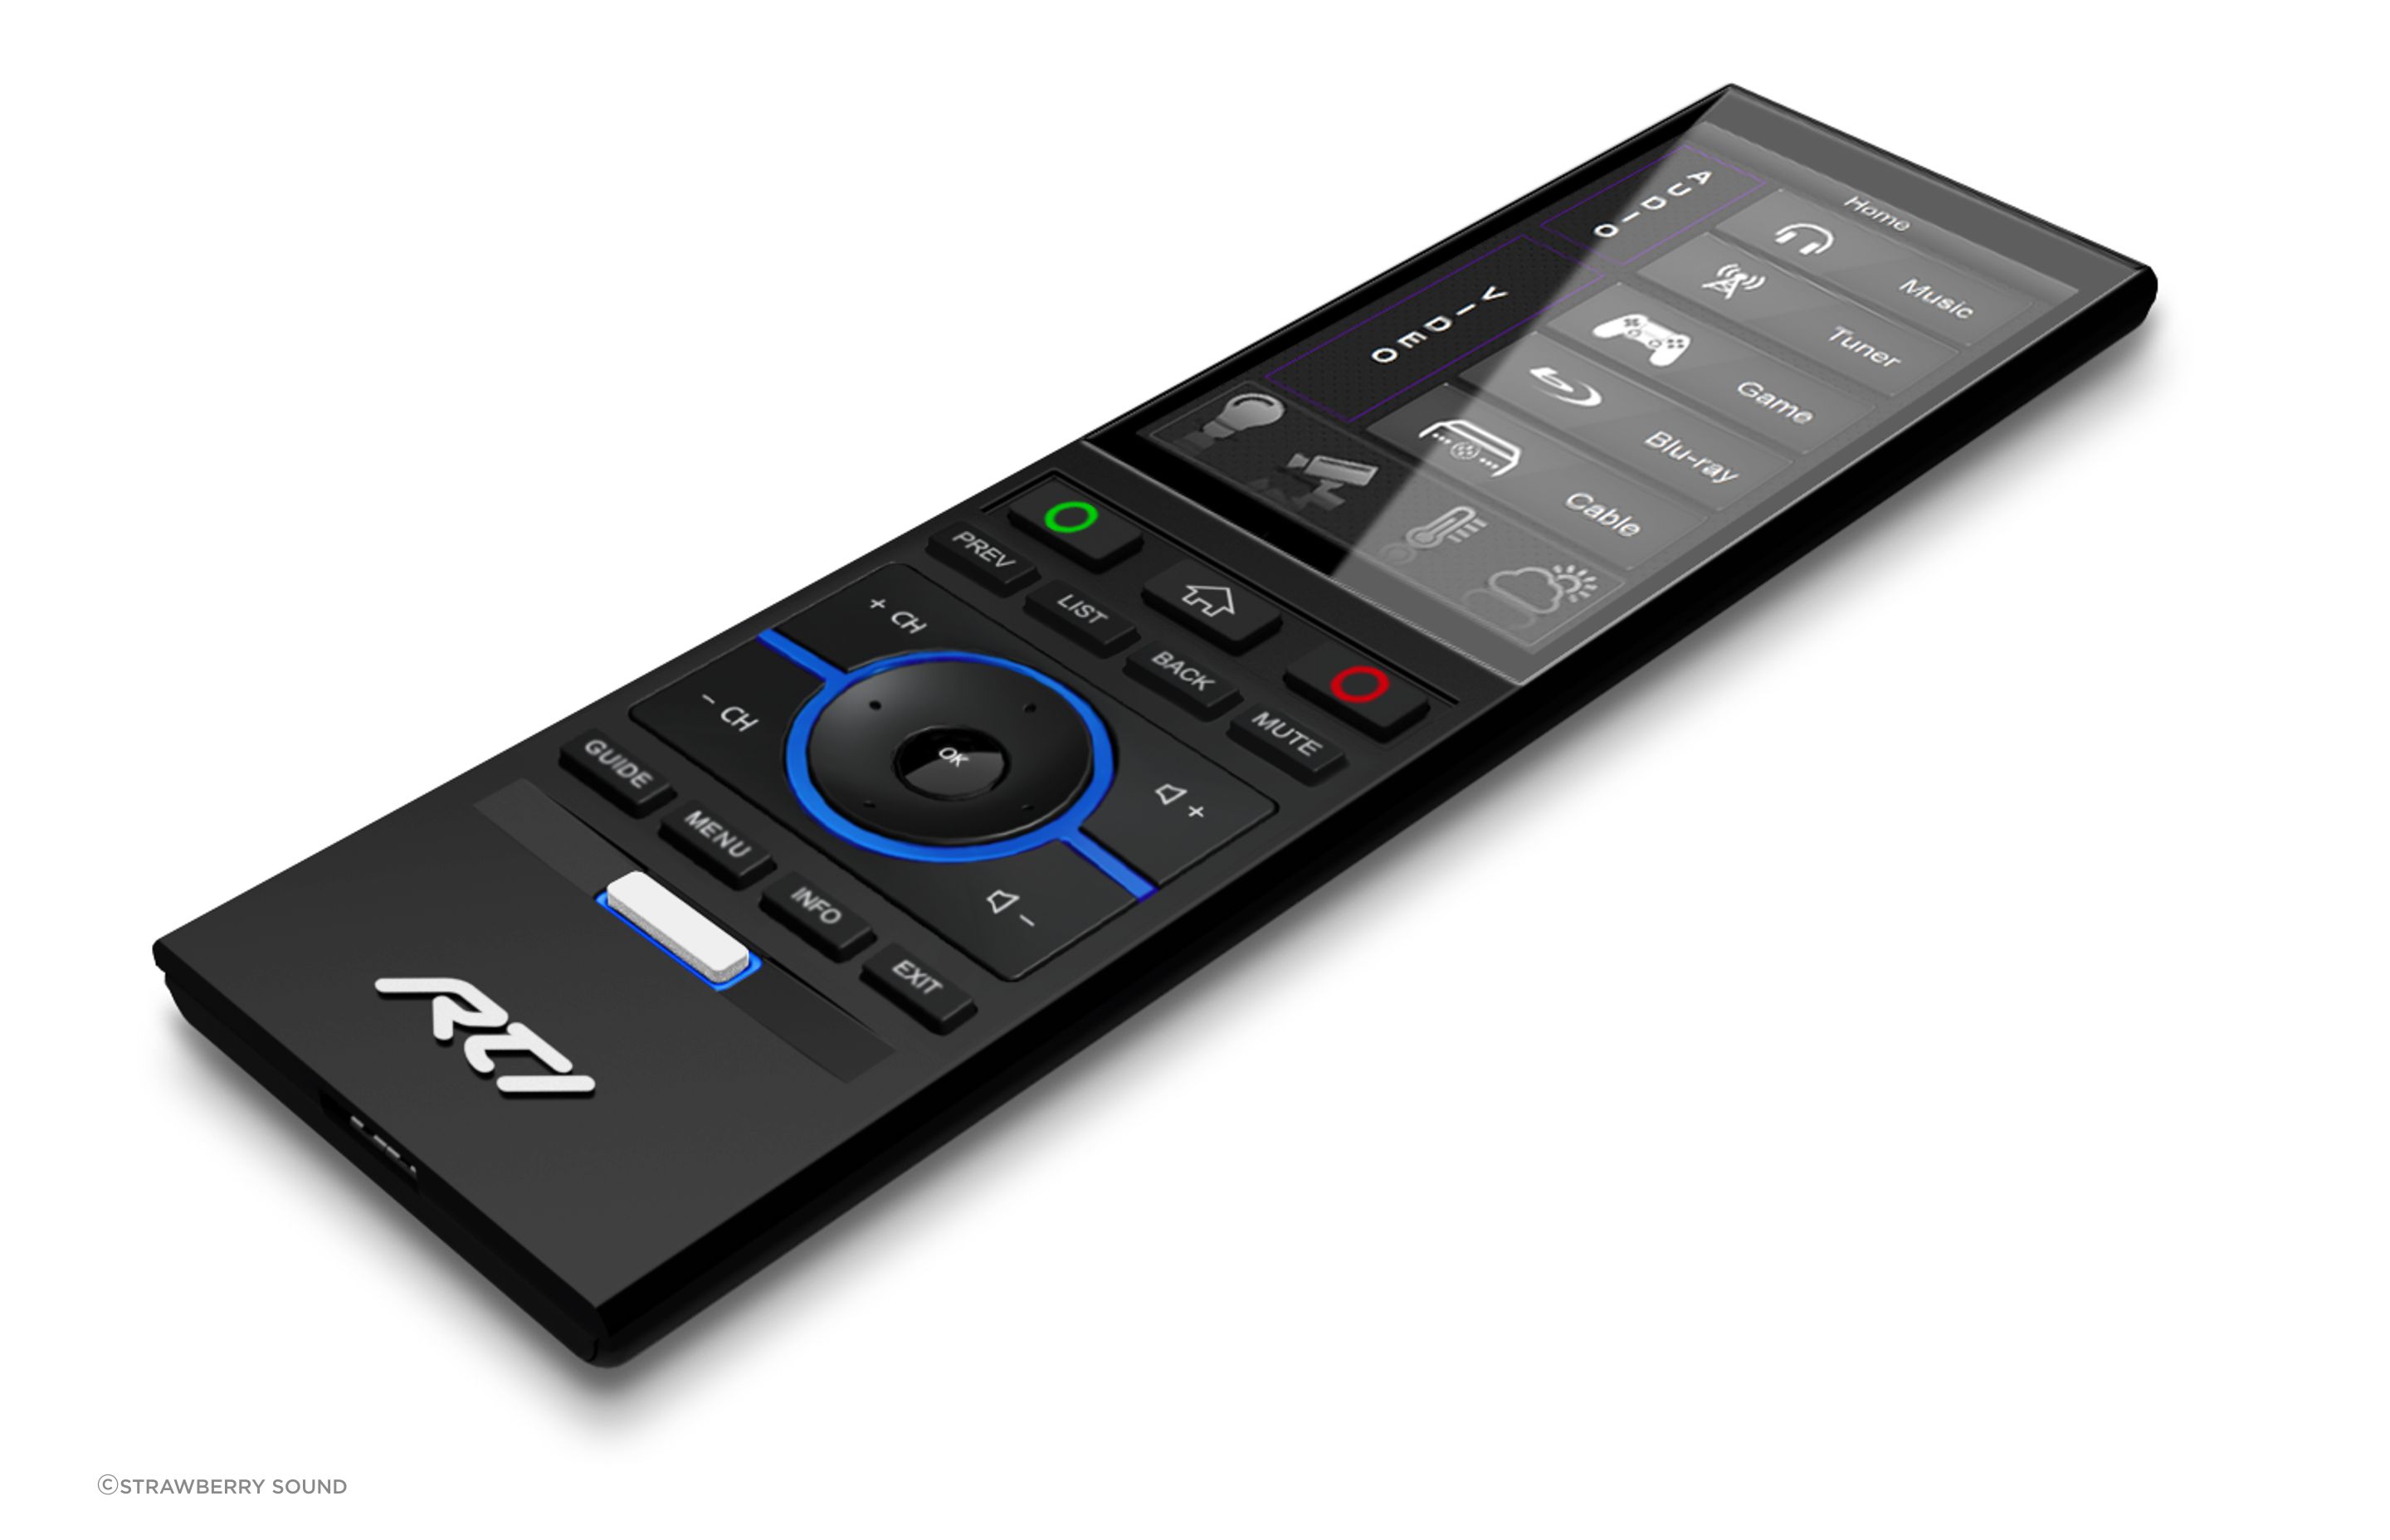 The T4x remote from RTI is a sleek all-in-one device for managing your home automation.